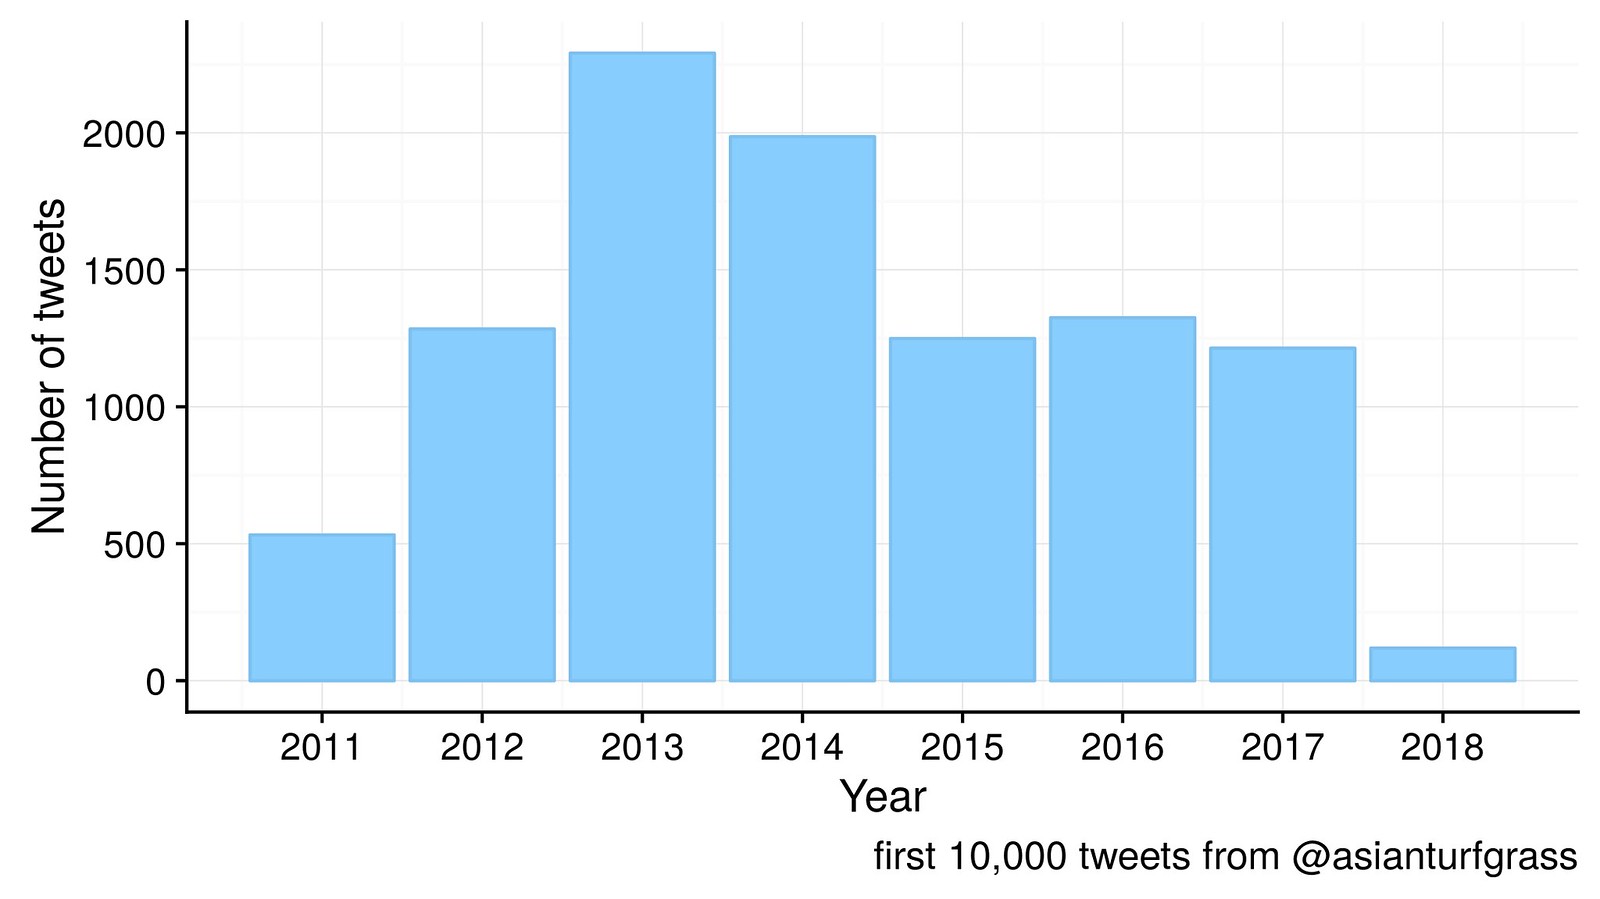 tweets by year